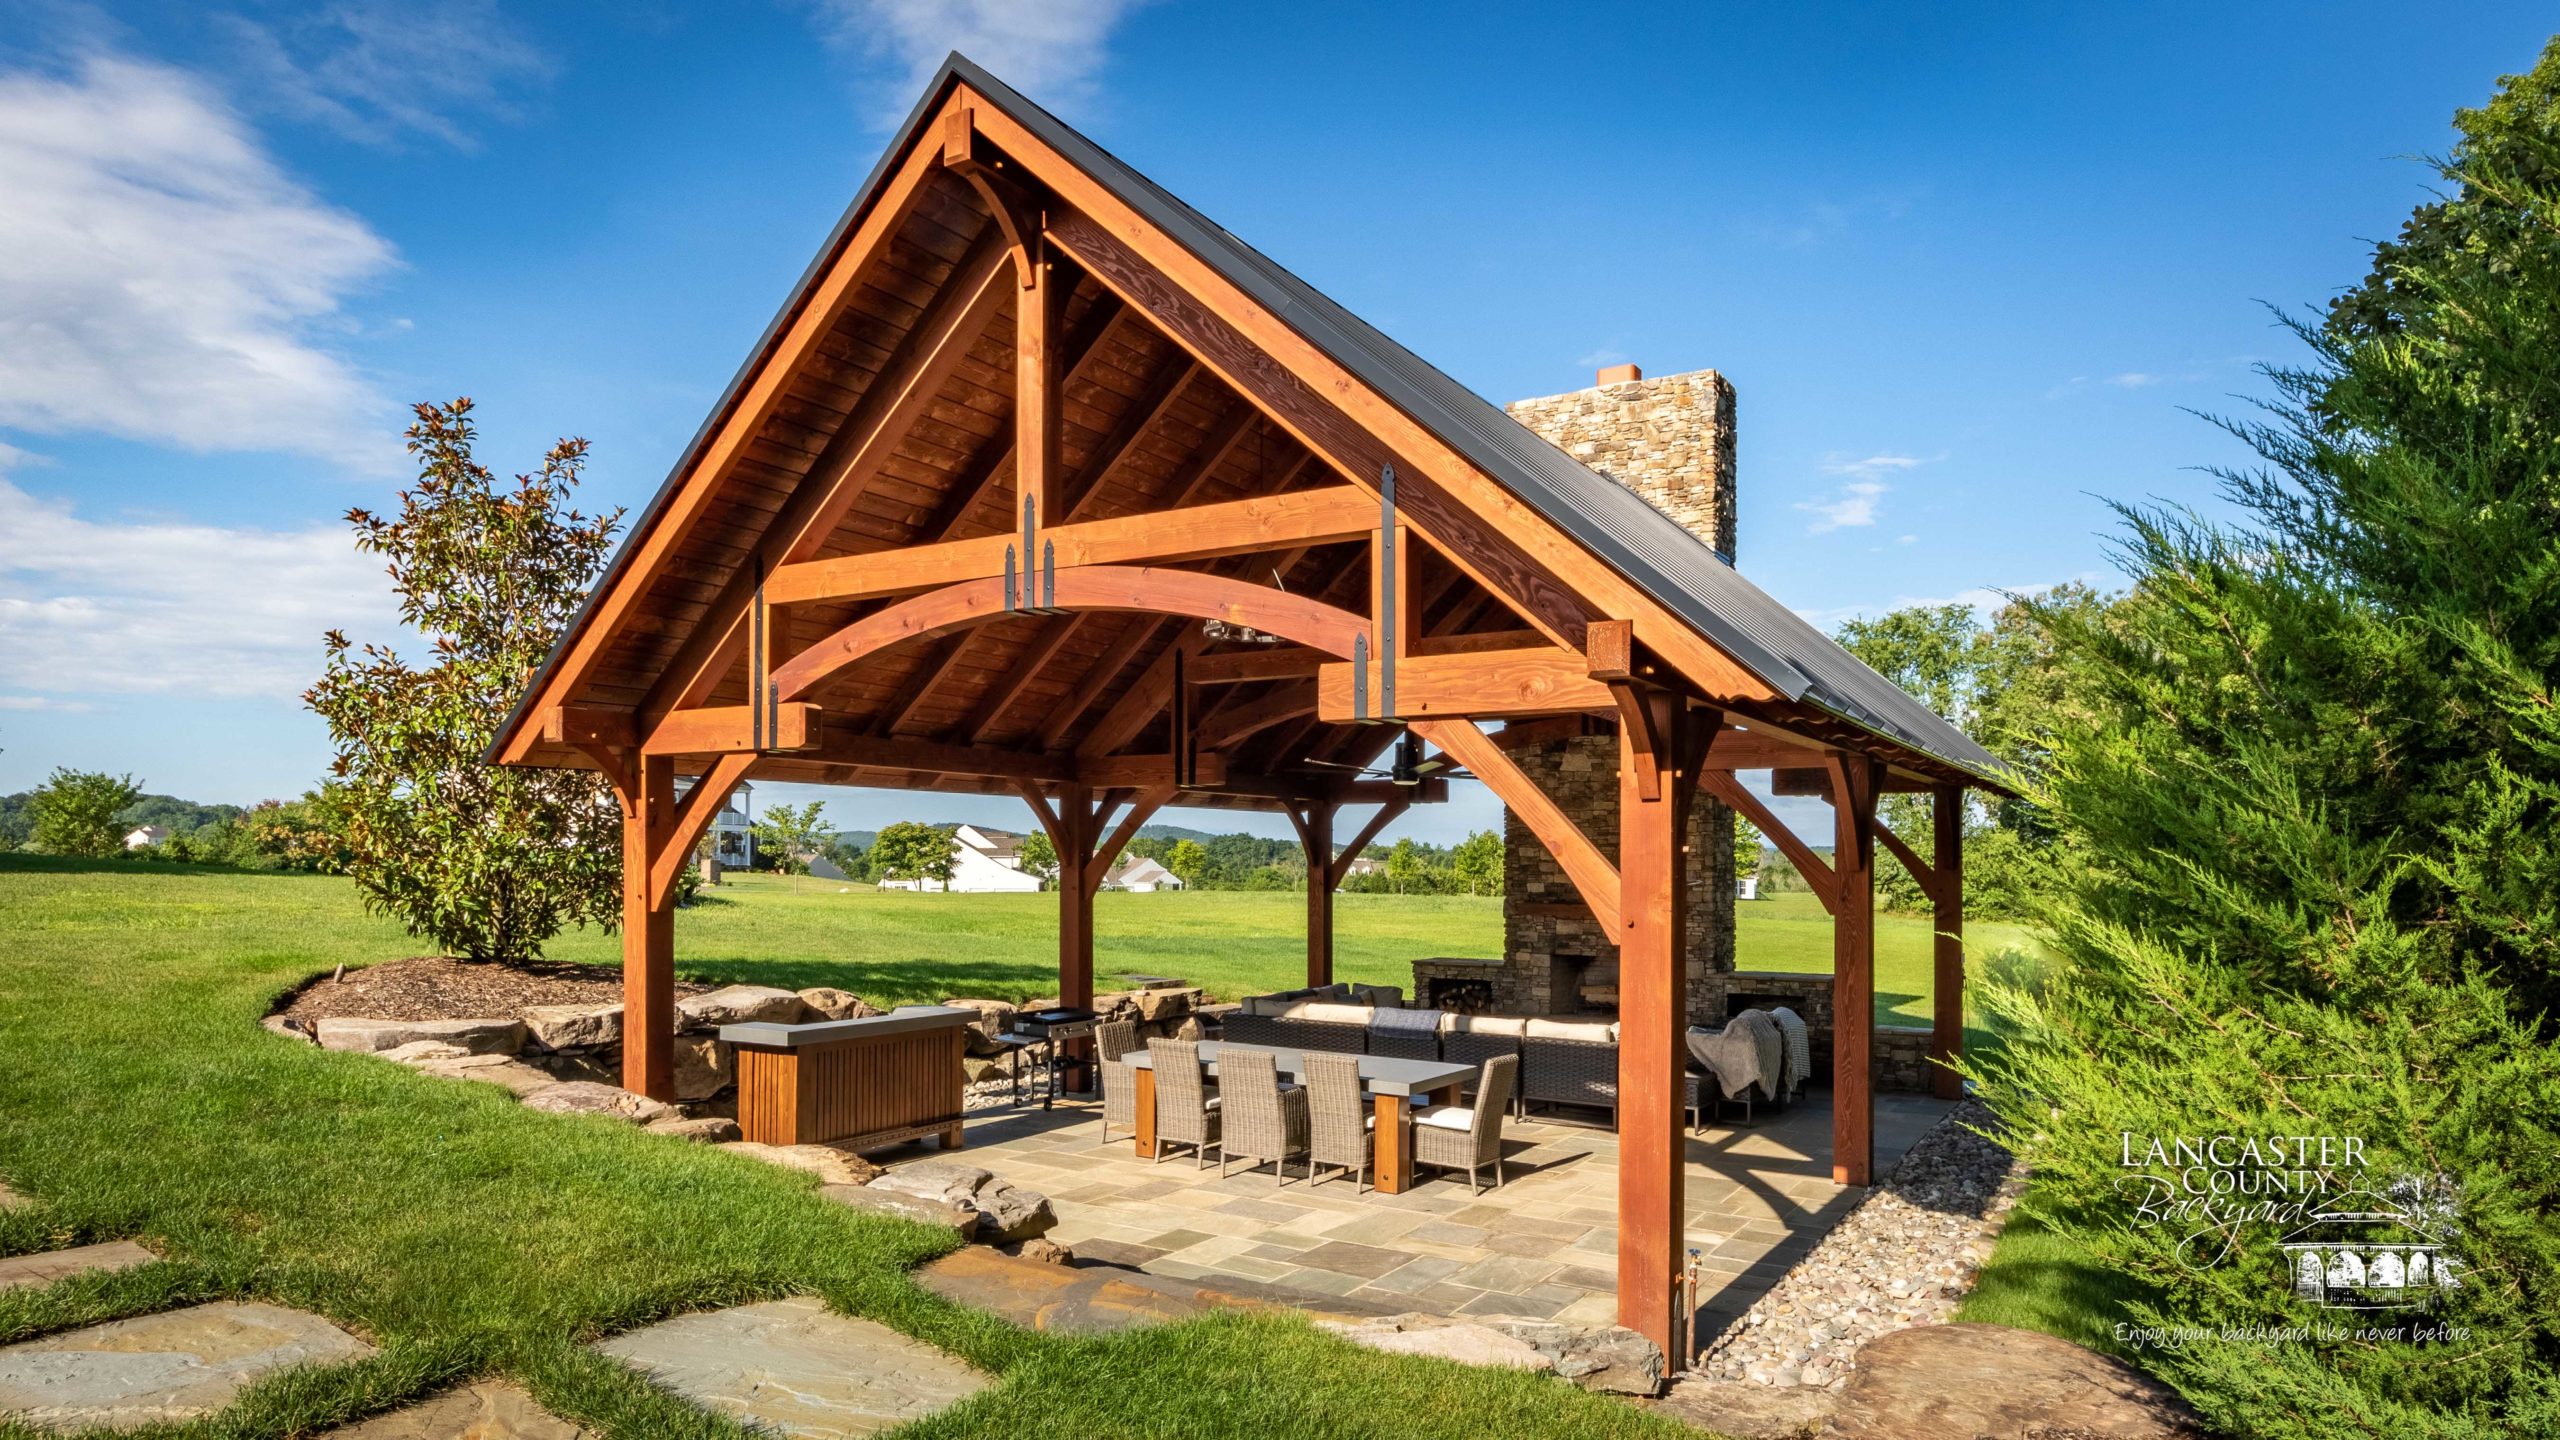 Enhancing your outdoor dining experience with upscale pavilions